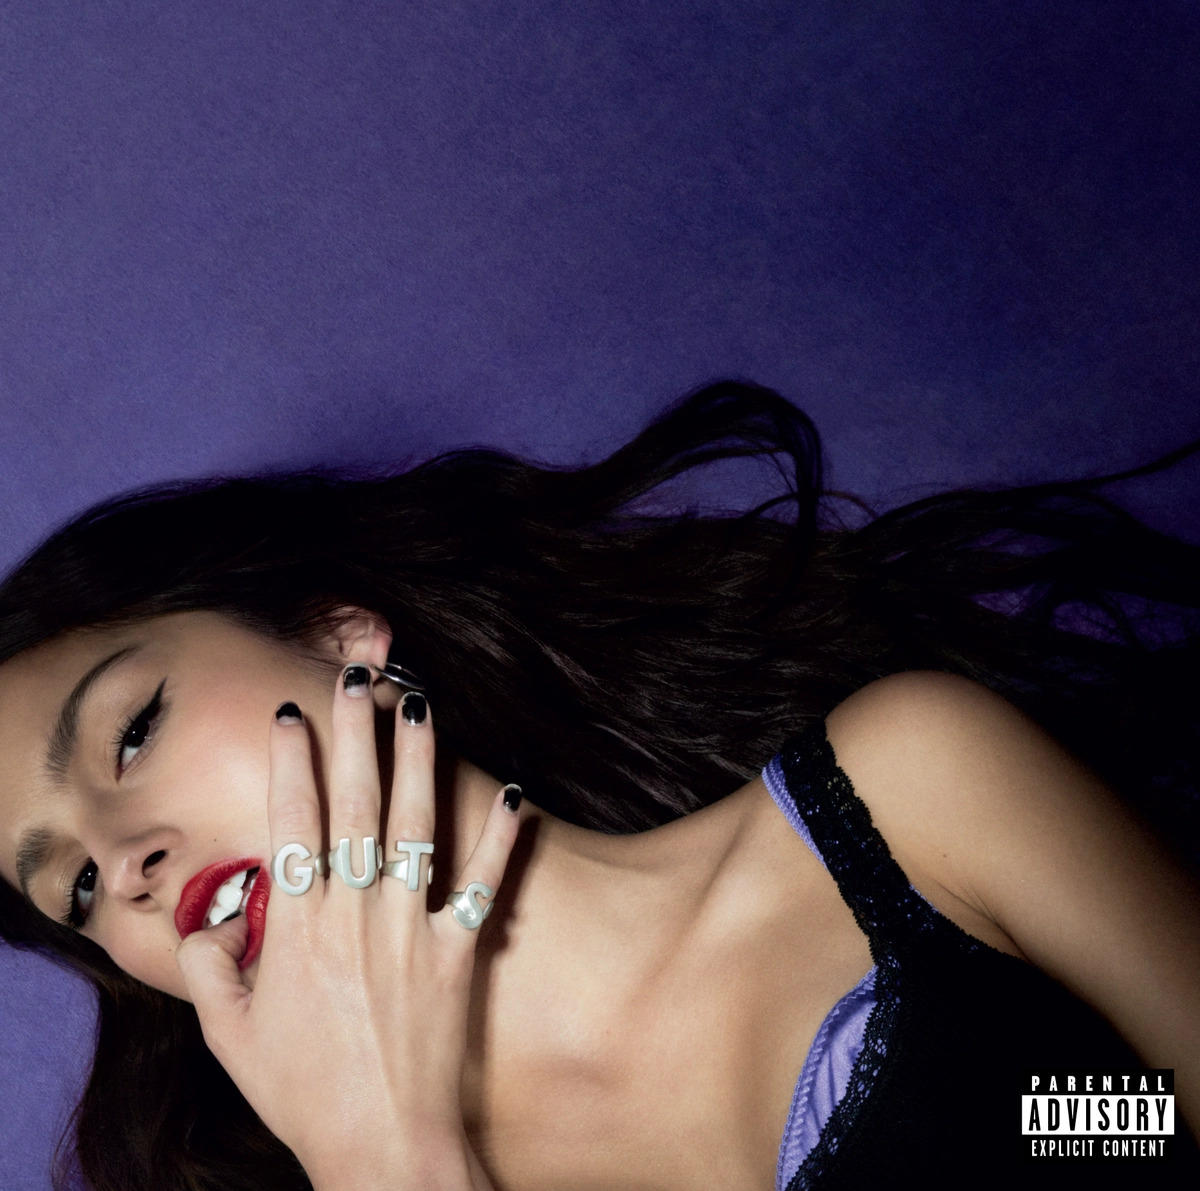 Olivia Rodrigo released her sophomore album GUTS on Sept. 8. It follows her massively successful 2021 debut album SOUR, which spent five weeks at the top of the Billboard 200 albums chart. (Photo Credit: Geffen Records)